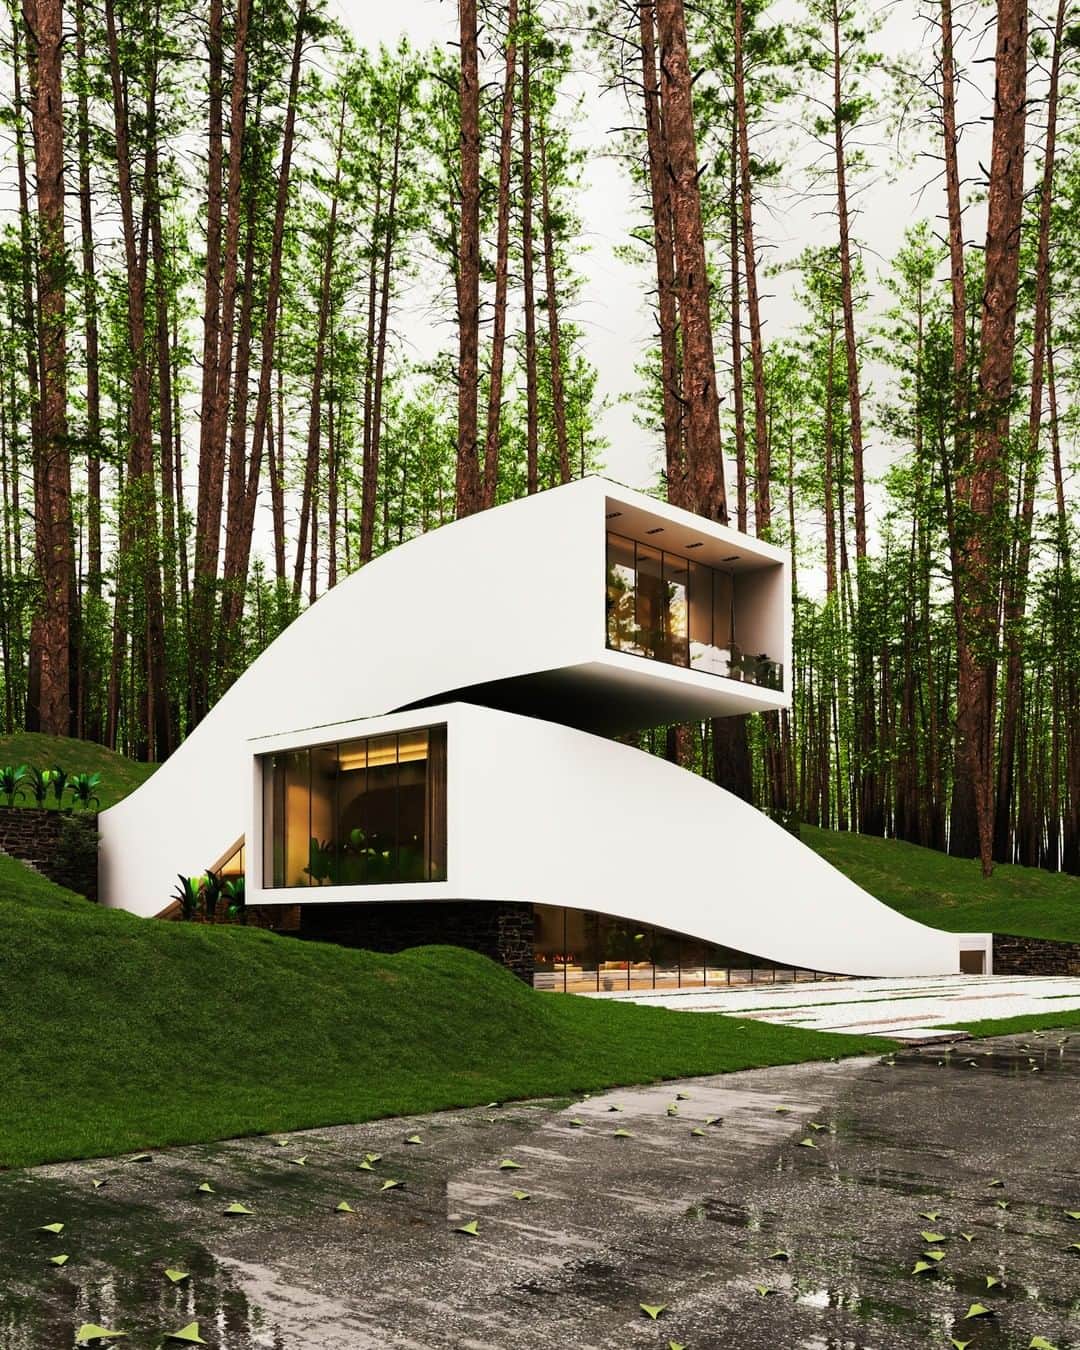 Architecture - Housesさんのインスタグラム写真 - (Architecture - HousesInstagram)「⁣ 𝗜𝗺𝗽𝗿𝗲𝘀𝘀𝗶𝘃𝗲 𝗿𝗲𝘀𝗶𝗱𝗲𝗻𝘁𝗶𝗮𝗹 𝗽𝗿𝗼𝗽𝗲𝗿𝘁𝘆 𝗶𝗻 𝗦𝘄𝗶𝘁𝘇𝗲𝗿𝗹𝗮𝗻𝗱⁣ ⁣ One of the keys of this project is how the green earth covers the roof of the facade. The result is a more striking visual effect.⁣ ⁣ The skylights and windows inside are the most characteristic elements of this house, letting in light in and allowing fabulous views.⁣ ⁣ The unique details of this project? The swimming pool and the cinema room. Swipe left and find them. Amazing! ➡️➡️⁣ _____⁣⁣⁣⁣⁣⁣⁣⁣⁣⁣⁣ 📐@miladeshtiyaghi 📍Switzerland ⁣ #archidesignhome⁣⁣⁣⁣⁣⁣⁣ _____⁣⁣⁣⁣⁣⁣⁣⁣⁣⁣⁣ #design #architecture #architect #arquitectura #luxury #architettura #archilovers ‎#architecturephotography #amazingarchitecture⁣ #lookingup_architecture #artdepartment #architecturallighting #house #archimodel #architecture_addicted #architecturedaily #arqlovers #Switzerland」3月1日 0時10分 - _archidesignhome_